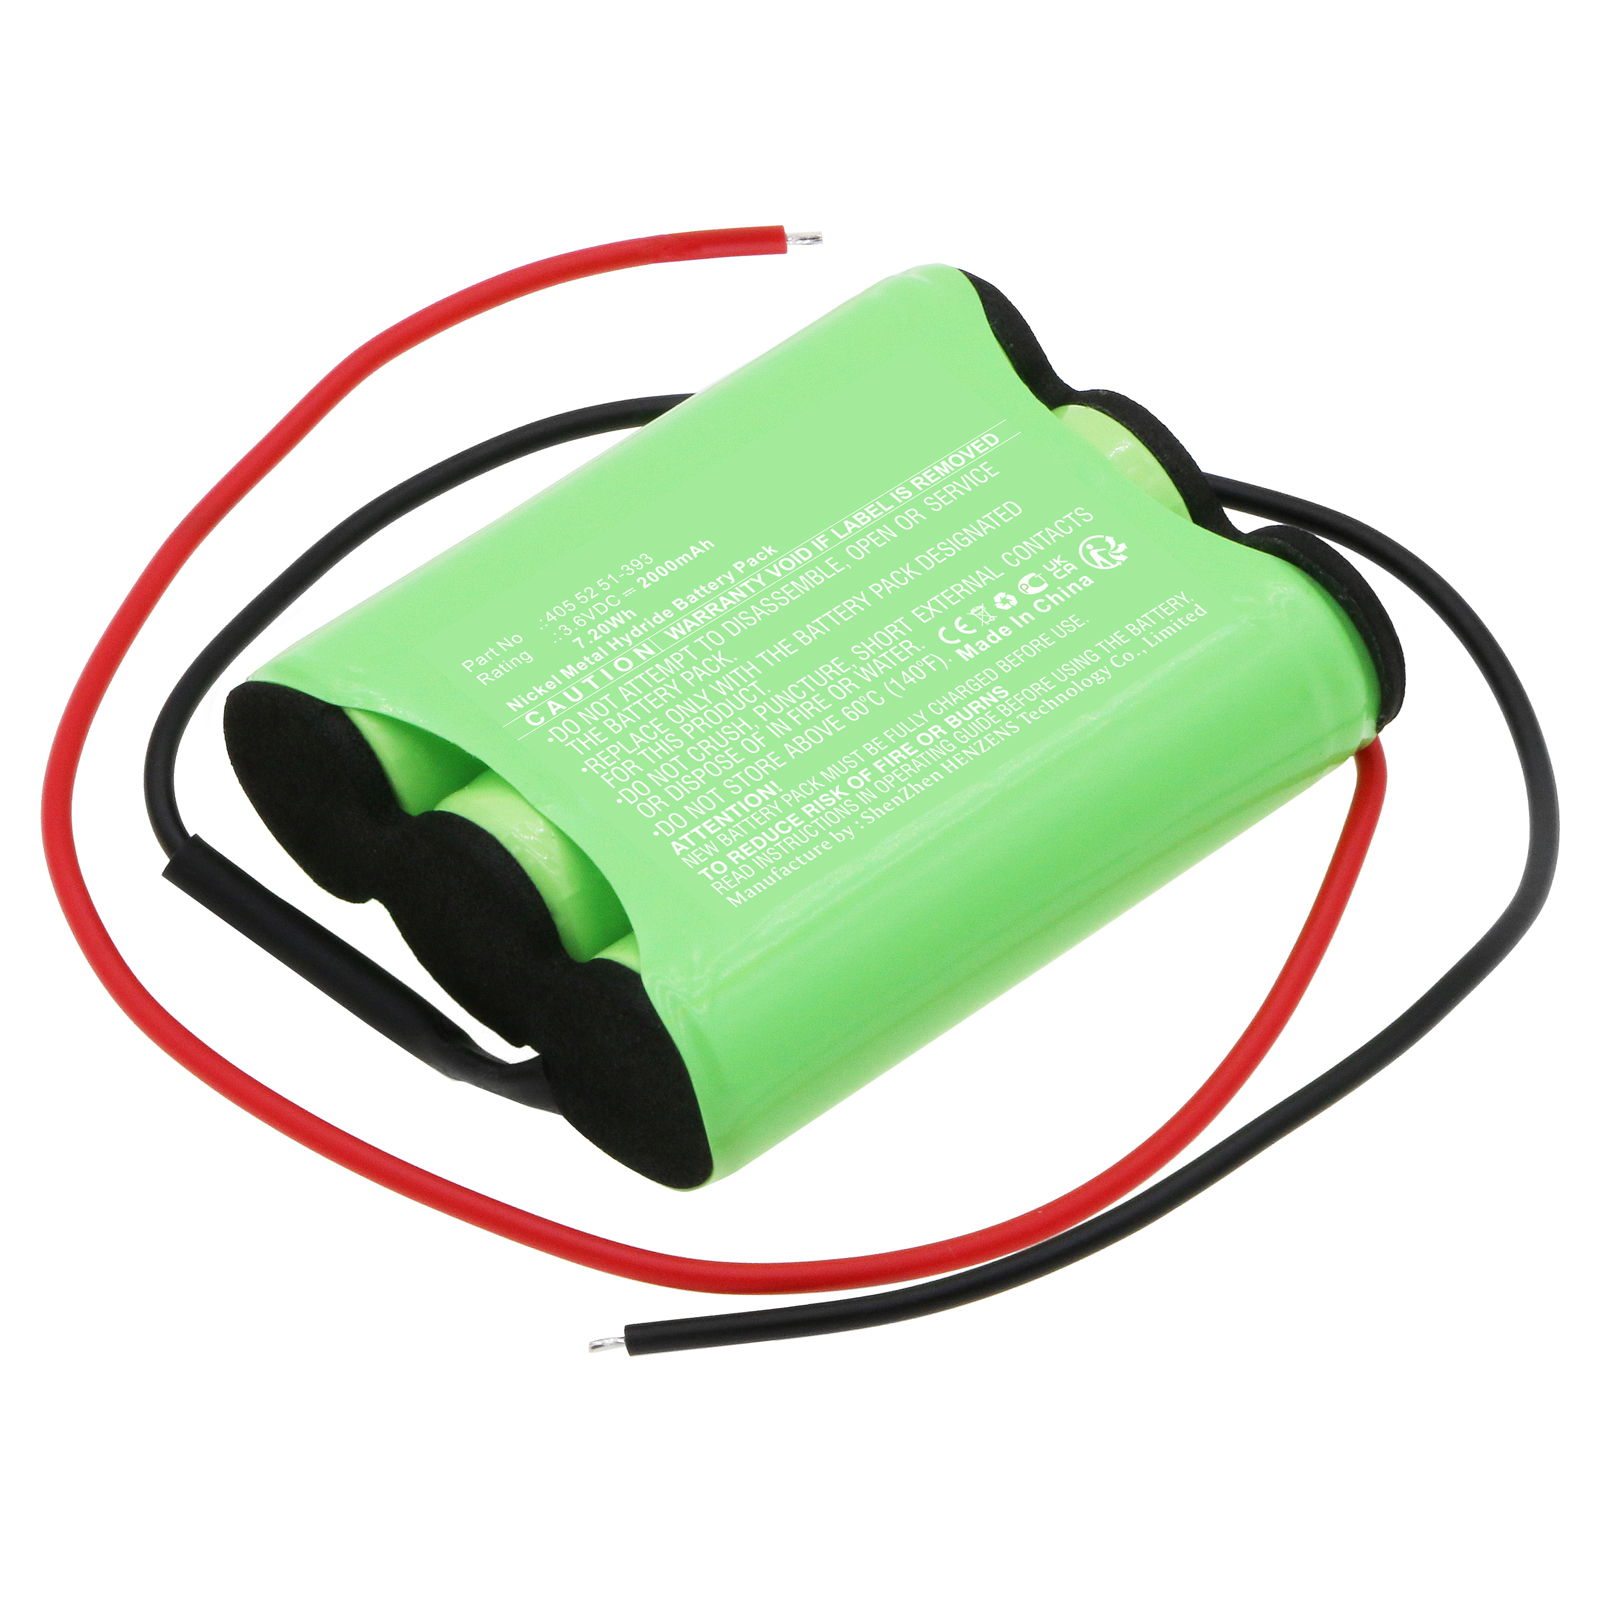 Batteries for AEGVacuum Cleaner